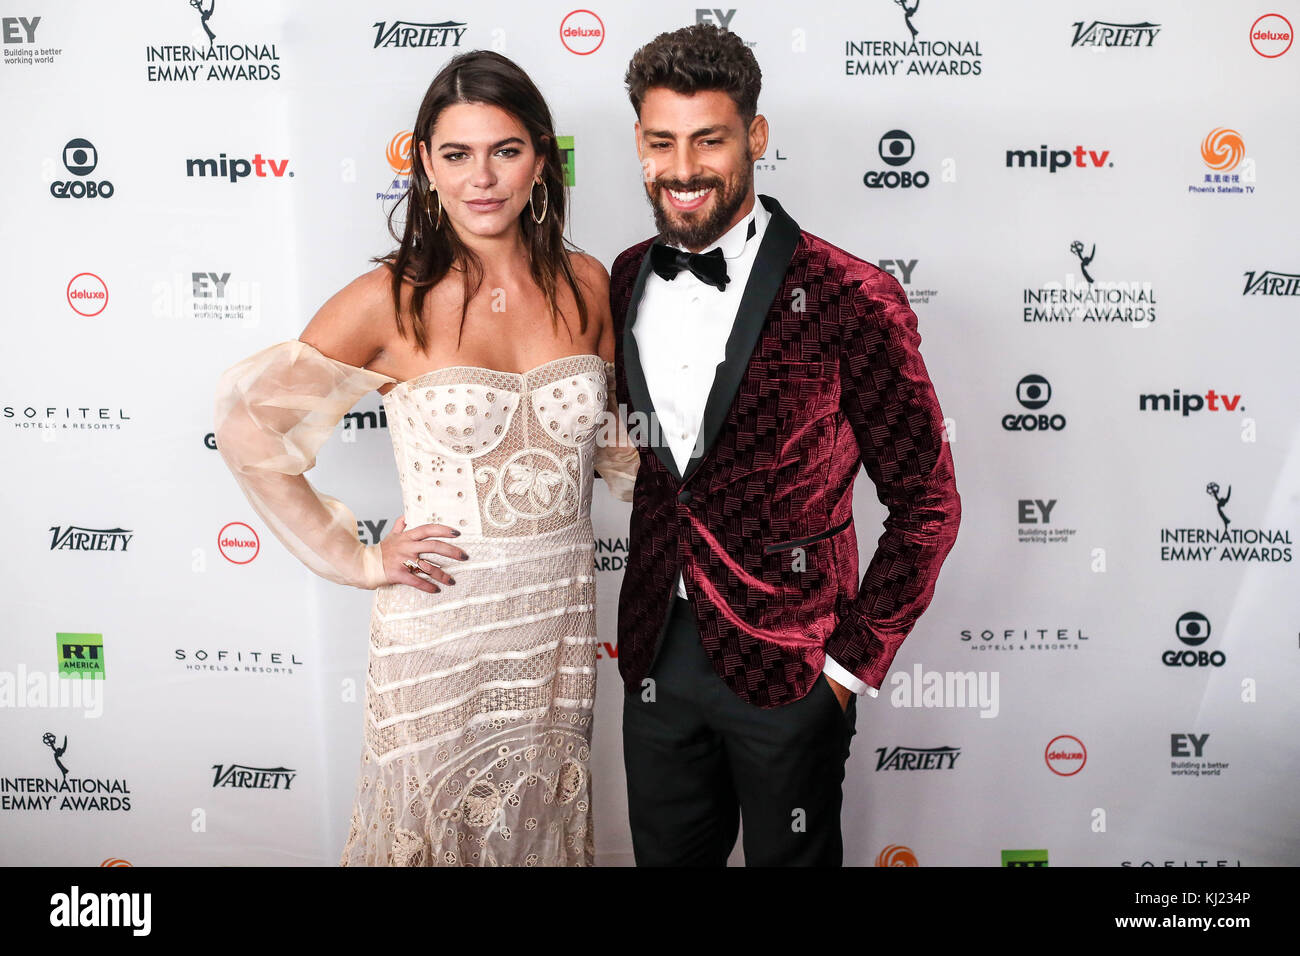 New York, USA. 20th November, 2017. Mariana Goldfarb  and Cauã Reymond during the 45th International Emmy awards gala in New York city on November 20, 2017. The International Emmy Award is an award ceremony bestowed by the International Academy of Television Arts and Sciences in recognition to the best television programs initially produced and aired outside the United States.   (PHOTO: WILLIAM VOLCOV/BRAZIL PHOTO PRESS) Stock Photo